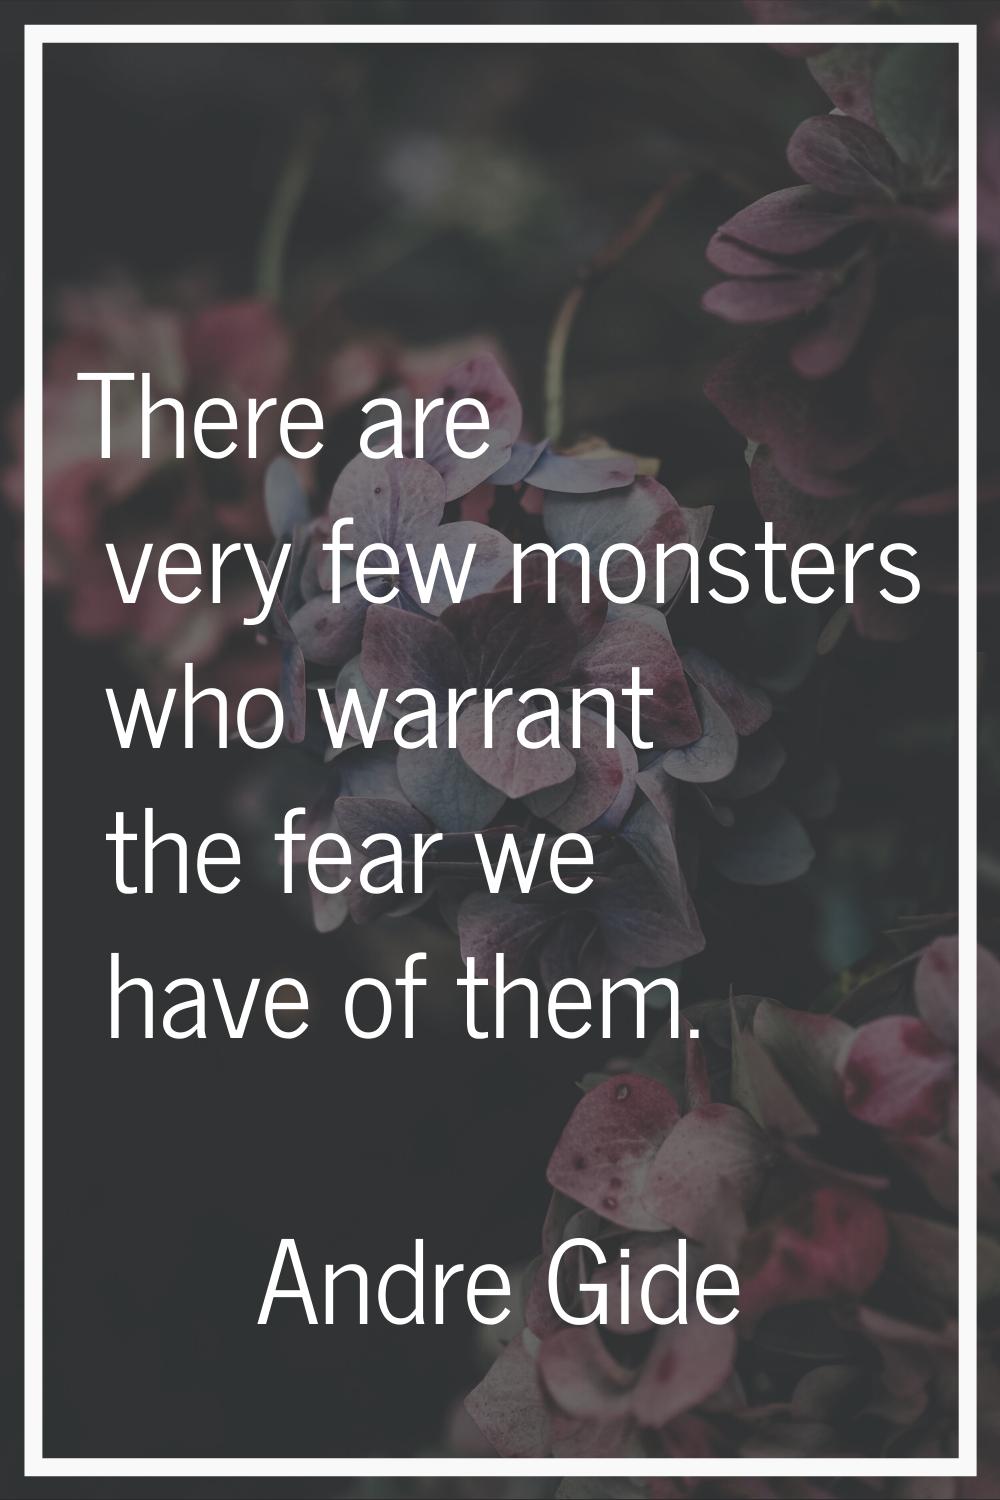 There are very few monsters who warrant the fear we have of them.